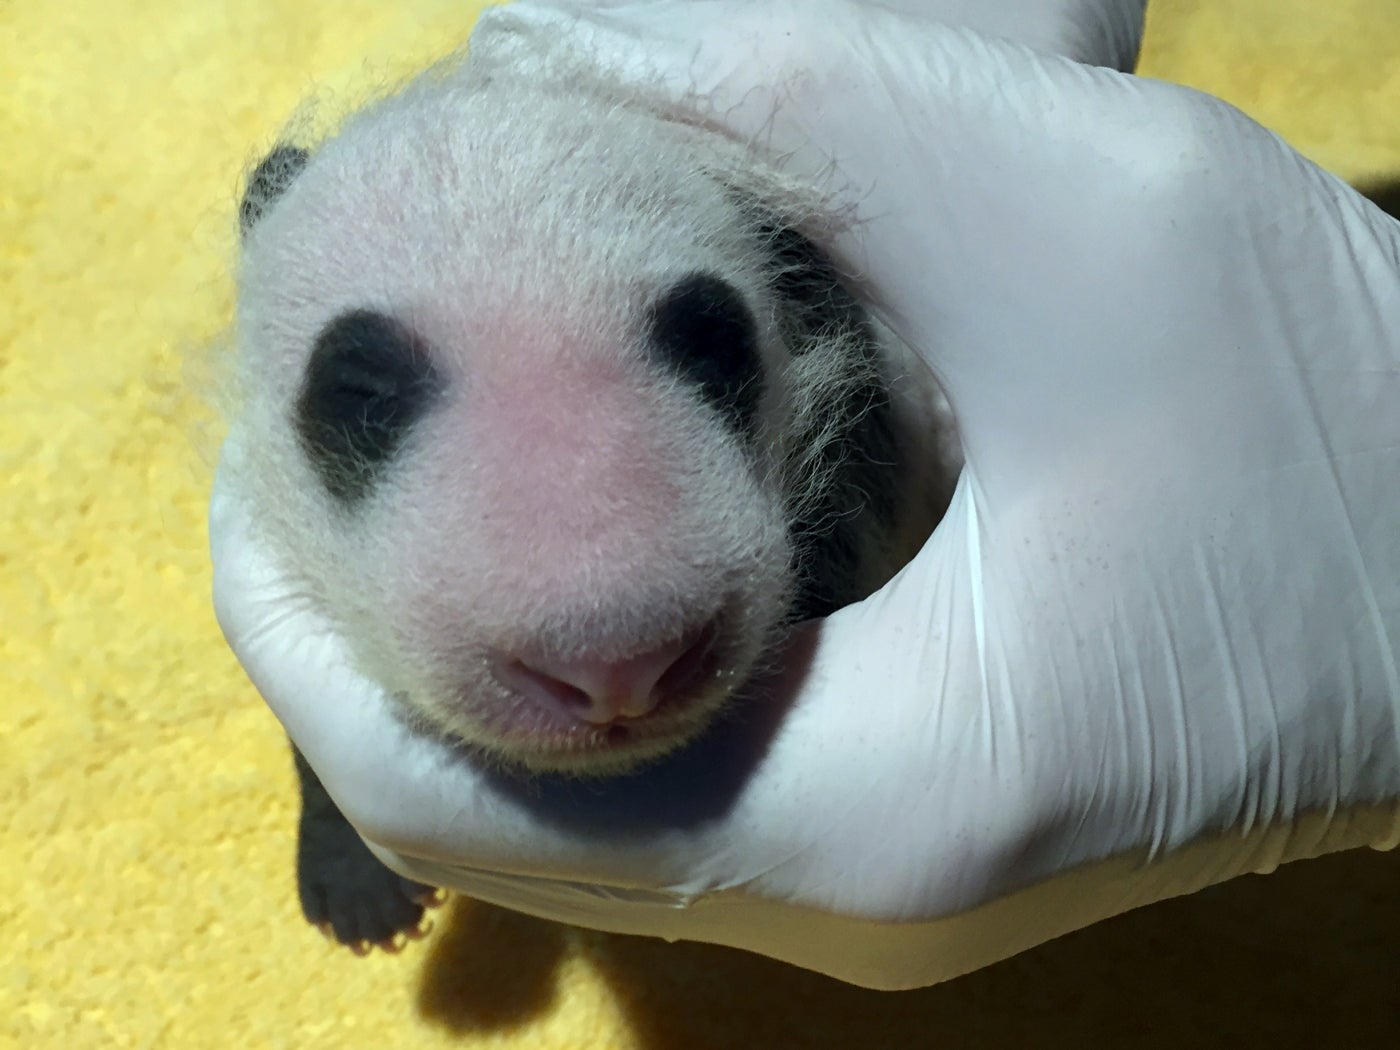 Keeper Marty Dearie holds the Smithsonian's National Zoo's 3-week-old giant panda cub.